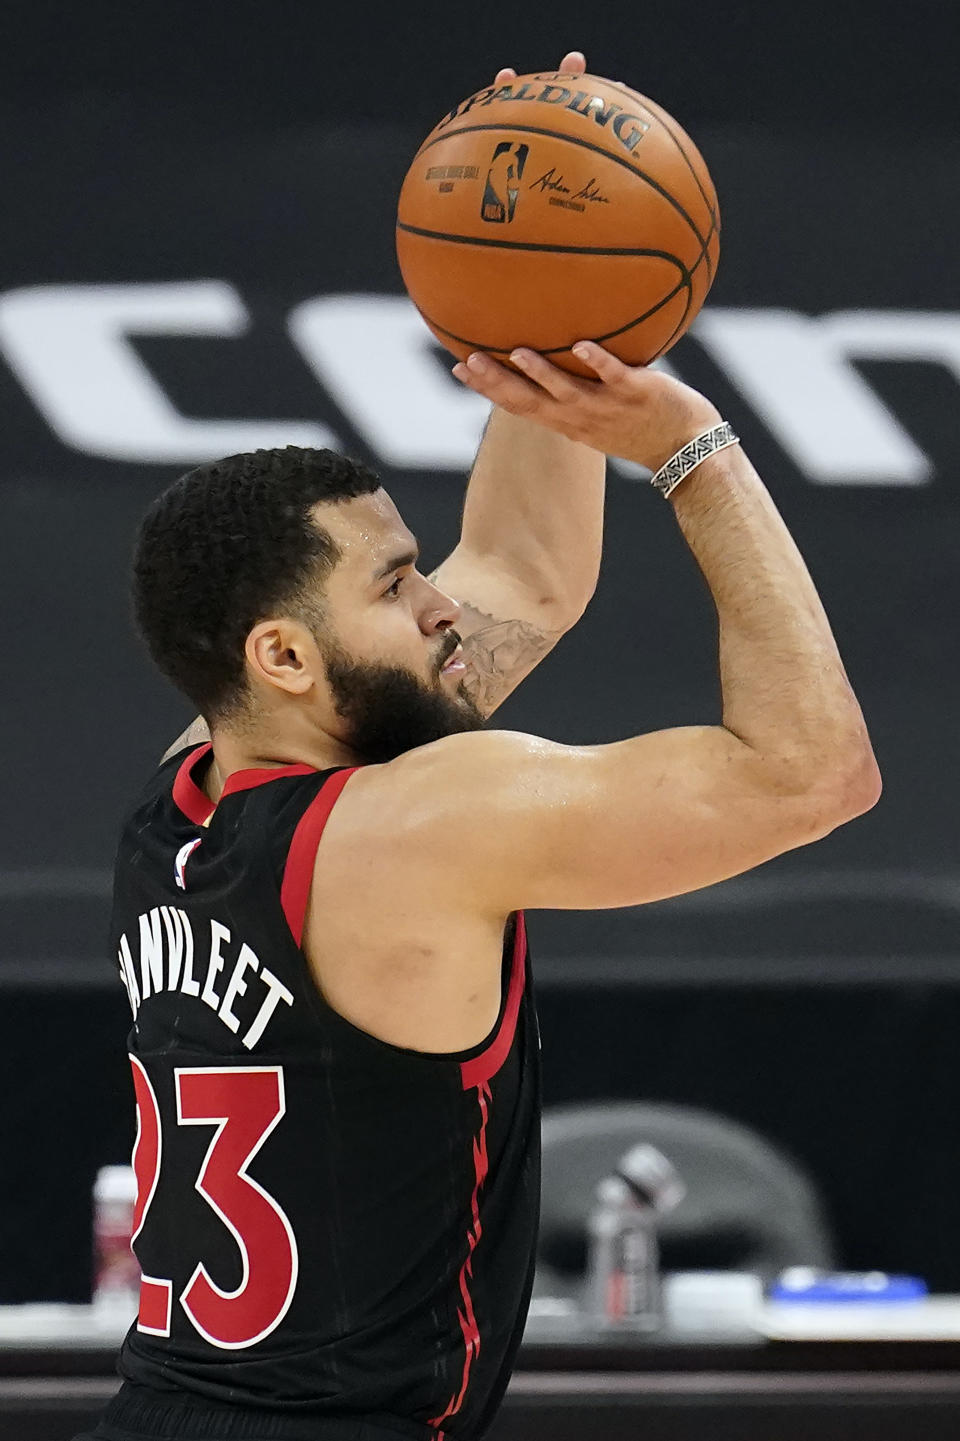 Toronto Raptors guard Fred VanVleet (23) puts up a shot against the Philadelphia 76ers during the second half of an NBA basketball game Sunday, Feb. 21, 2021, in Tampa, Fla. (AP Photo/Chris O'Meara)